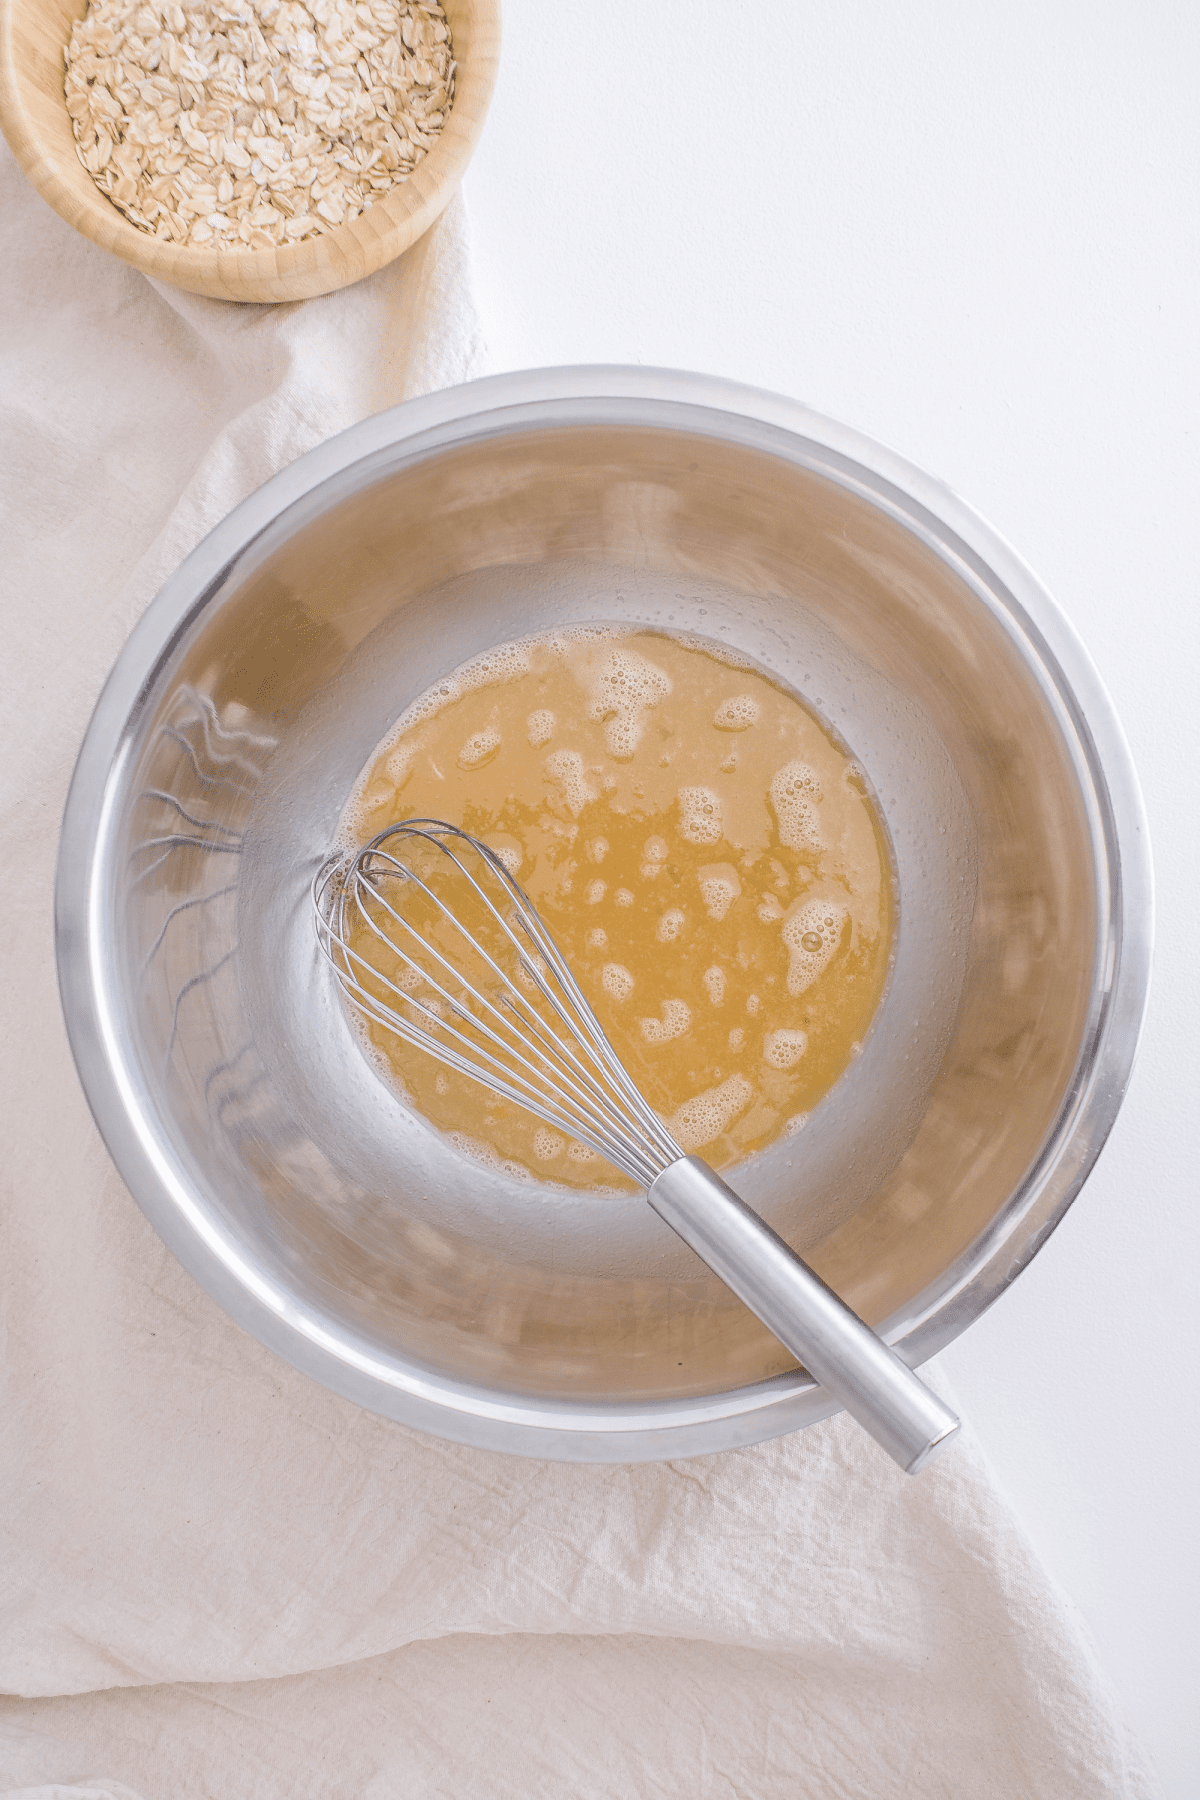 Syrup & coconut oil in mixing bowl